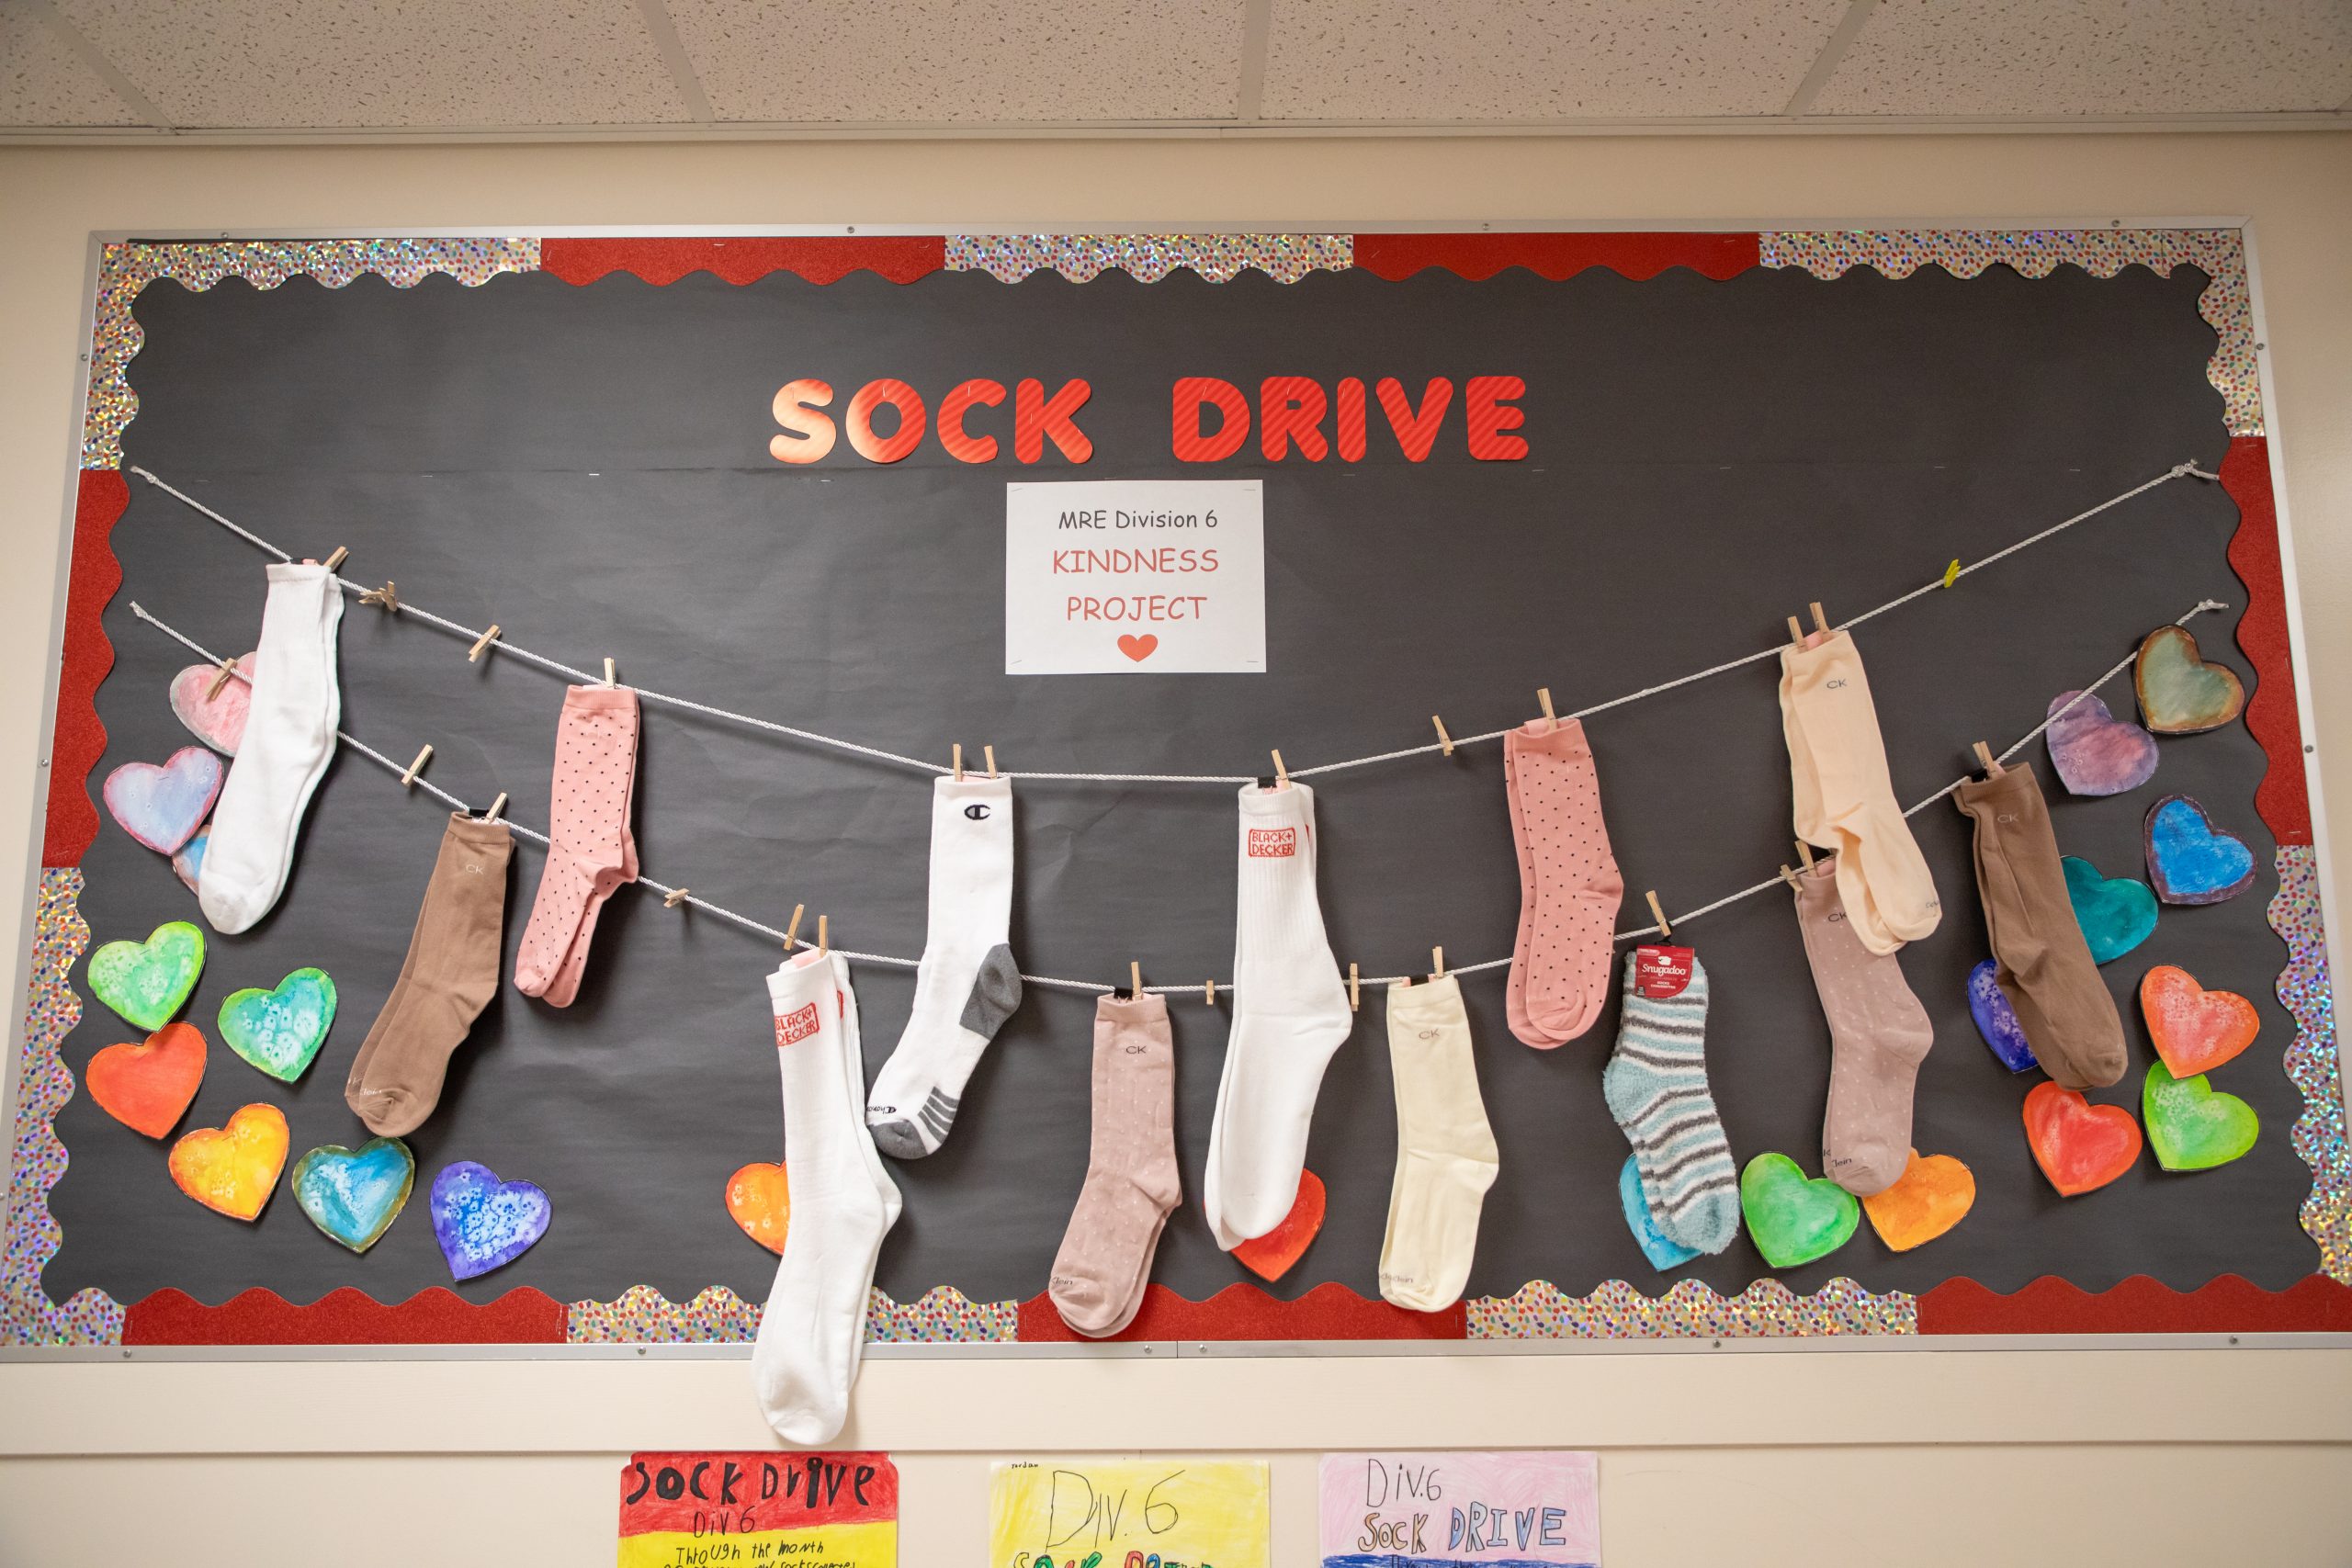 Bulletin board decorated with socks hanging from a clothesline.